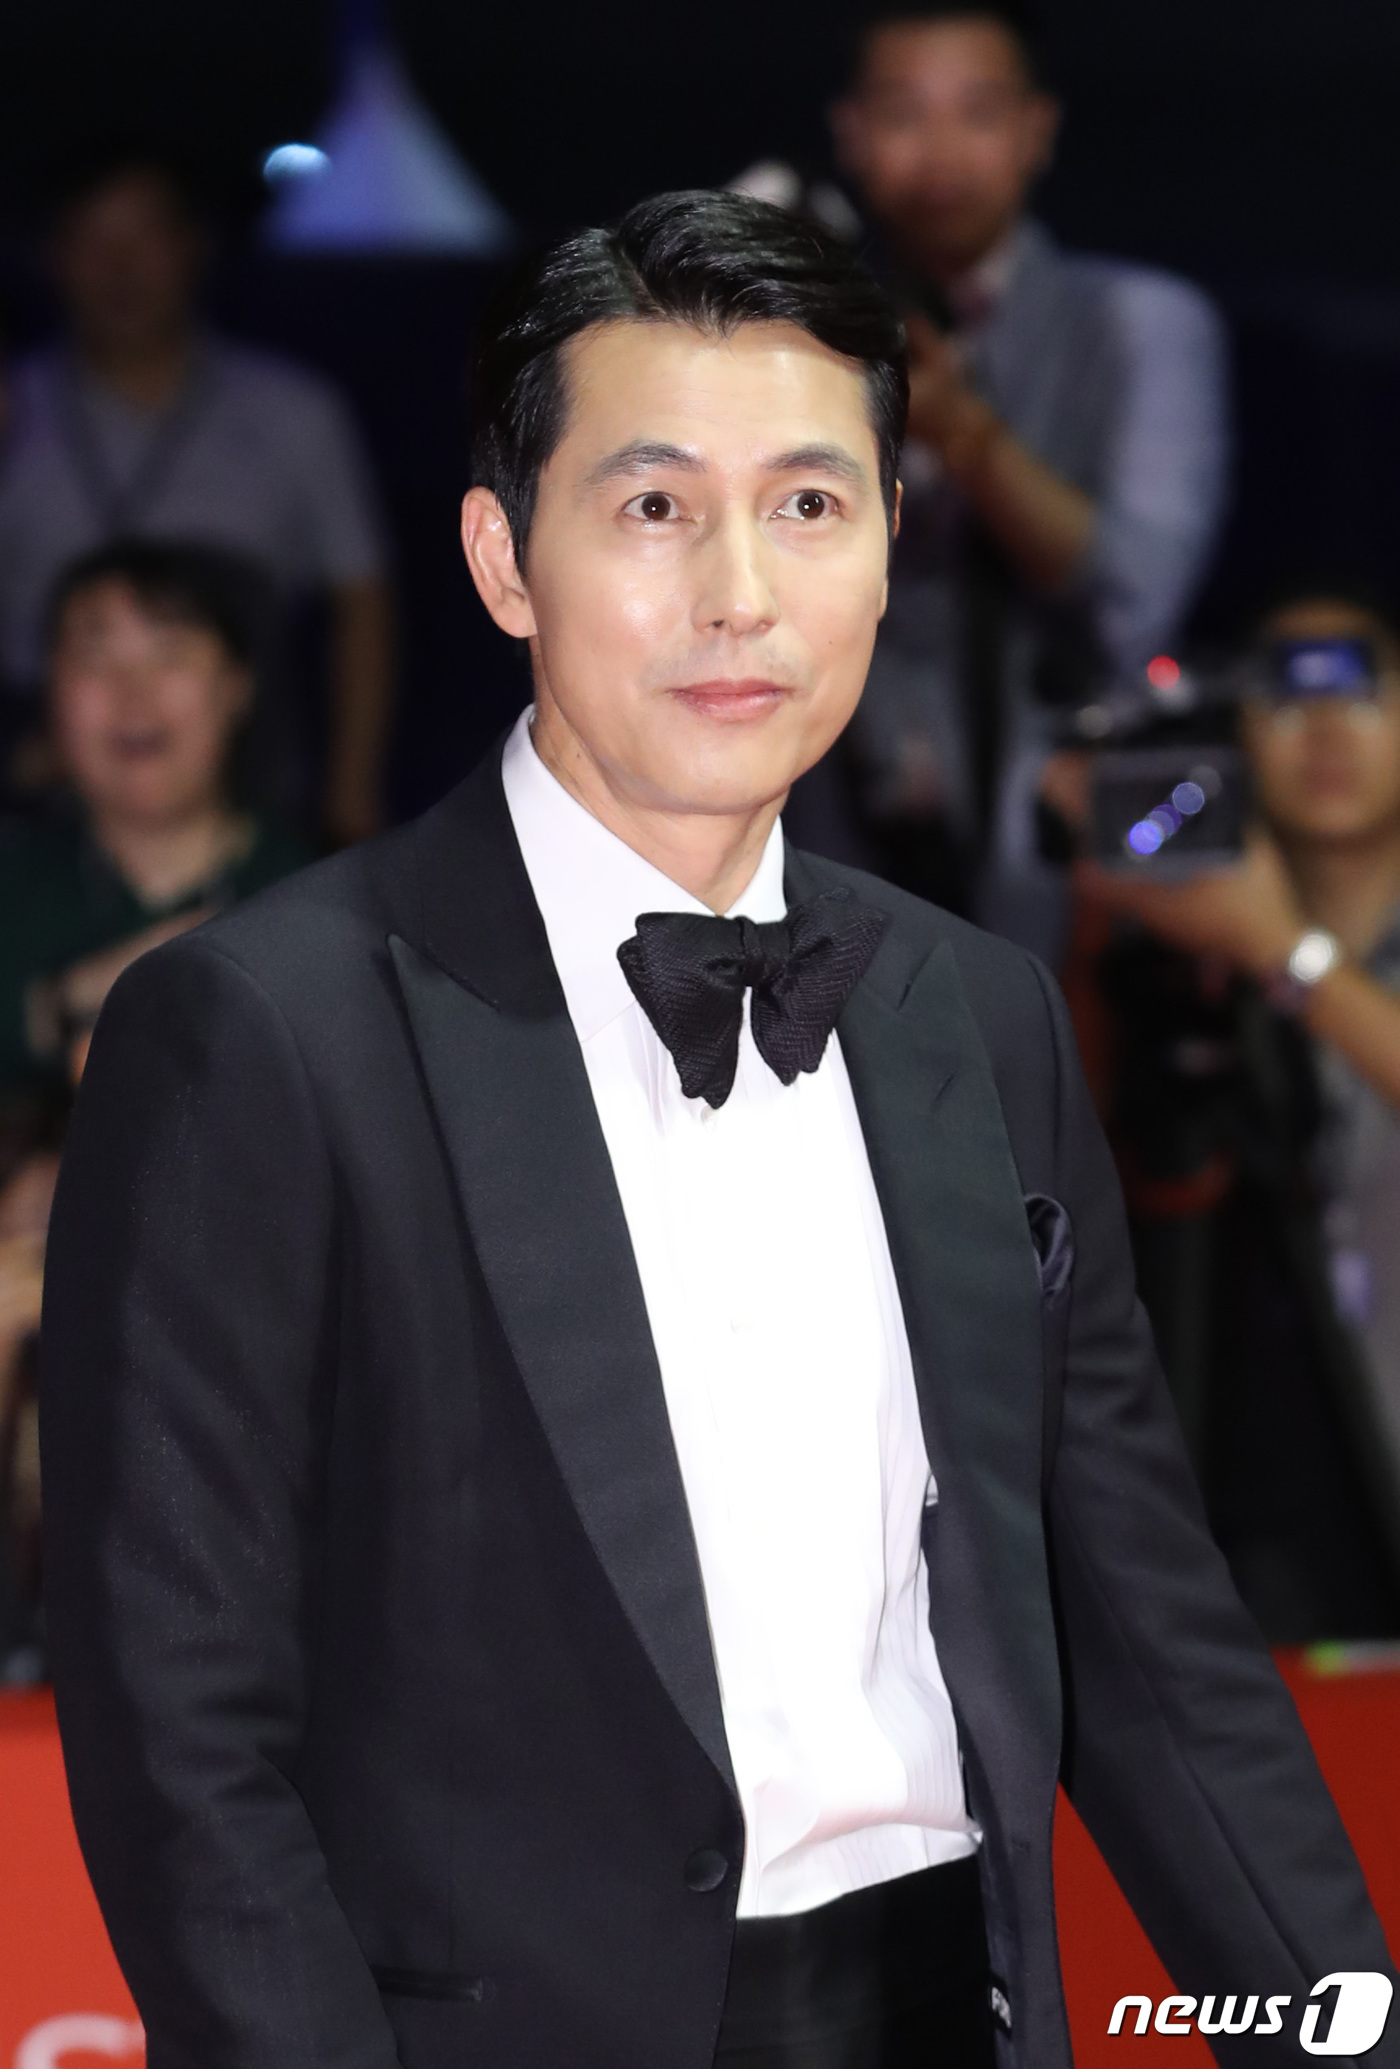 Netflix said on July 23, We will produce the new Korean original series and Space SF thriller Goyos Sea. Actor Jung Woo-sung will participate as a producer. Goyos Sea tells the story of elite members who go to the research base abandoned on the moon to retrieve a questionable sample in the background of the future earth, which is lacking in water and food due to global desertification.Goyos Sea, a series of short films of the same name directed by Choi Hang-yong, who received attention at the 13th Missen Short Film Festival in 2014, will draw a tense unpredictable story with a vast space.The screenplay is directed by Park Eun-kyo, who won the screenplay award for the 29th Korea Film Critics Association Award for the movie Mother, and directed by Choi Hang-yong, who directed the original work.In addition, Jung Woo-sung, who has challenged production and starring at the same time in the feature film Do not forget me in 2016, participates in the production and attracts attention.As a producer, Jung Woo-sung hopes to draw a picture with Netflix.